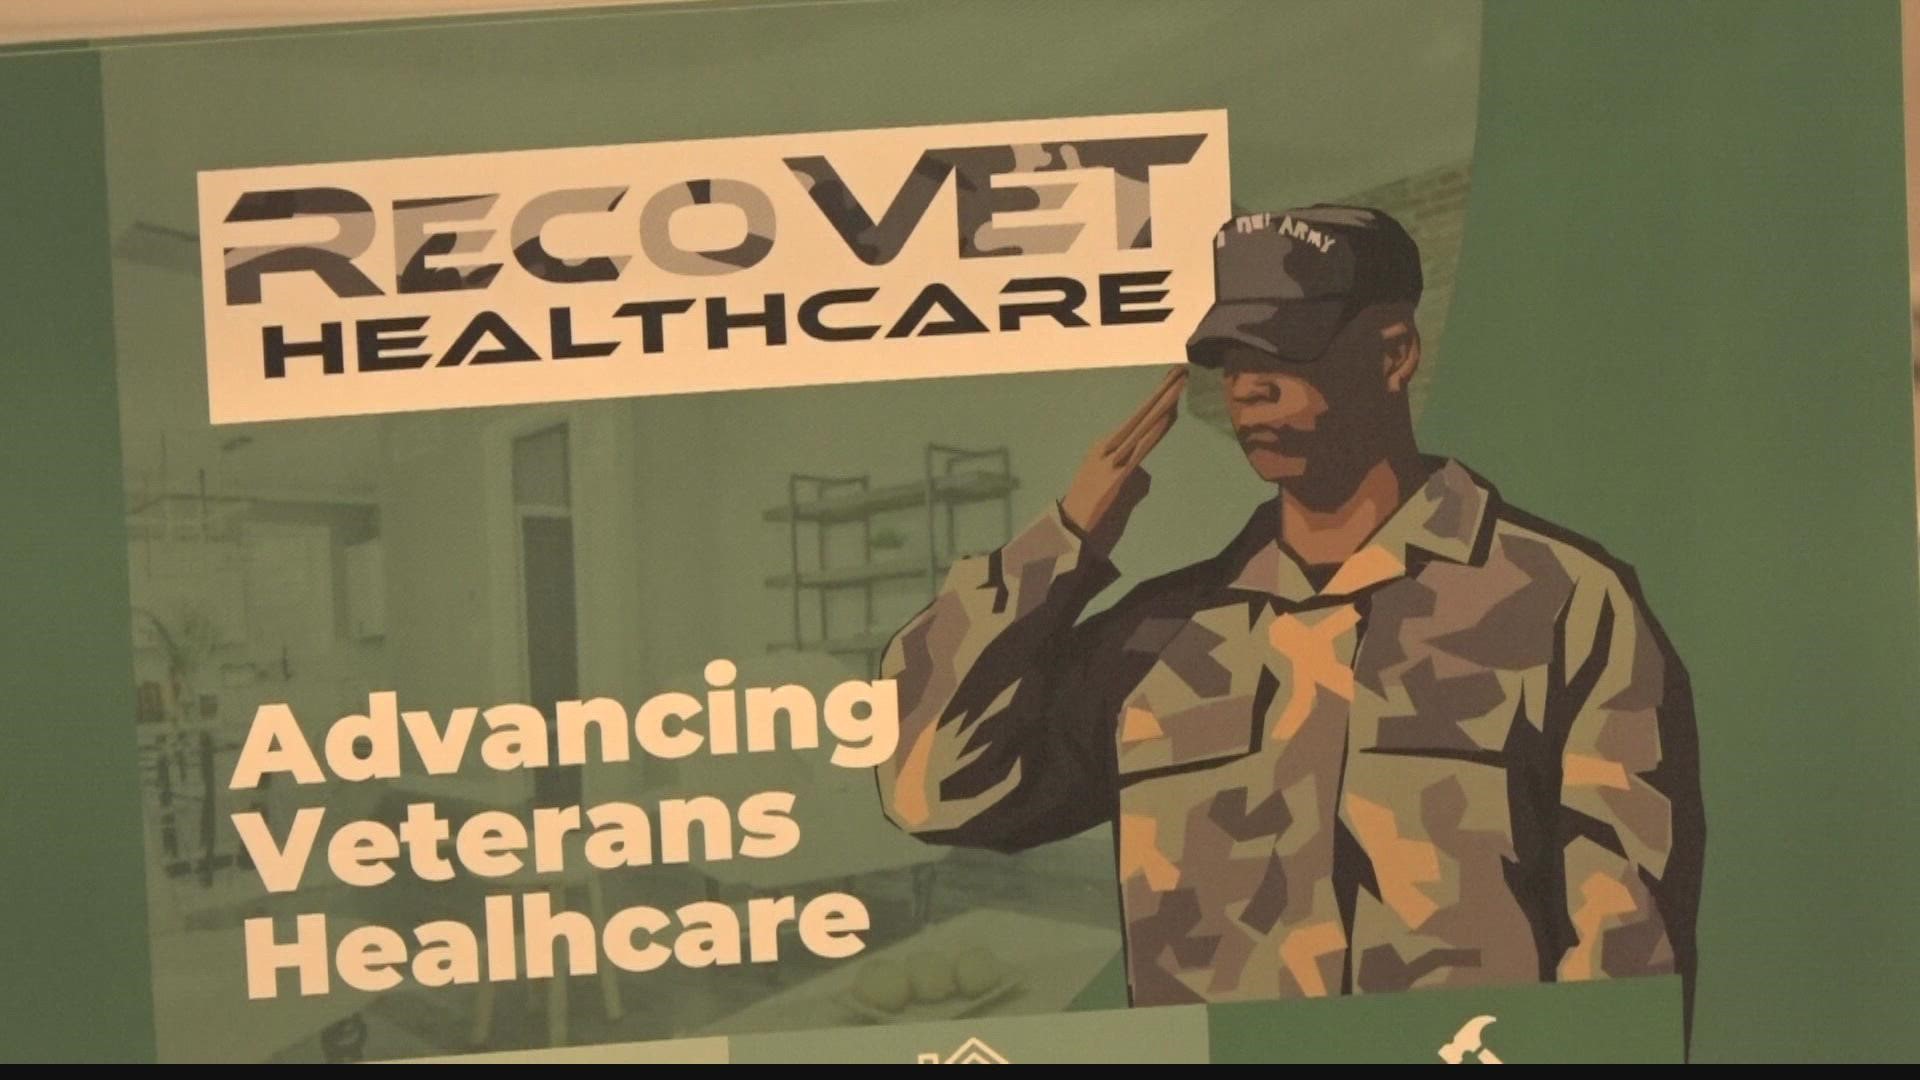 RecoVet House is a new chemical dependency treatment and job training facility serving military veterans in St. Louis.